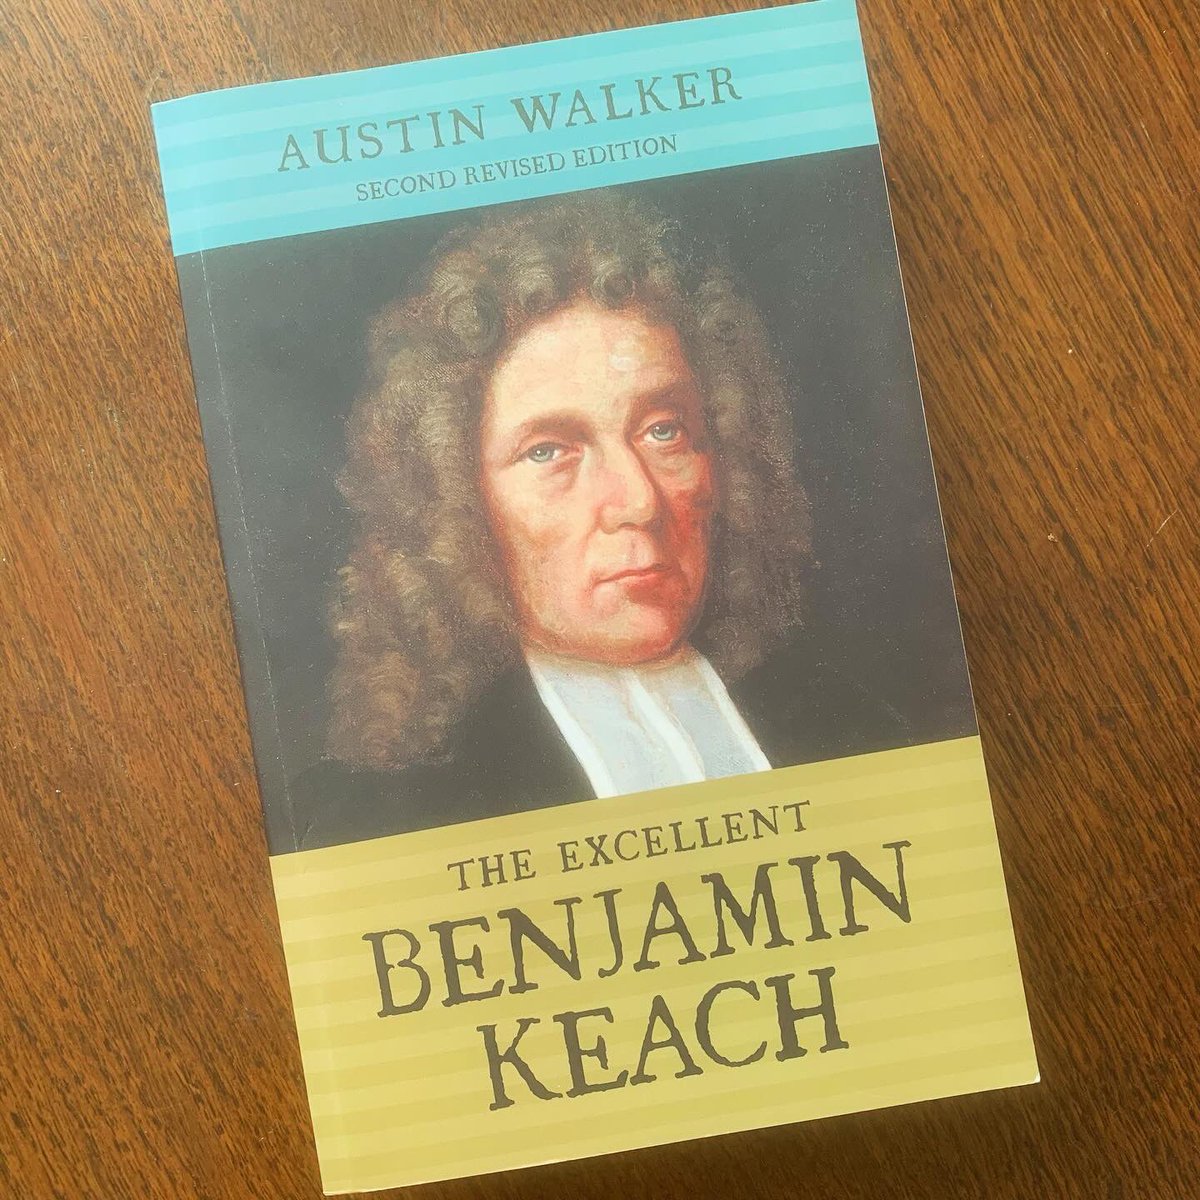 Keach endured persecution for his faith & rich blessing on his ministry at a time of great ecclesiastical & political turmoil. His many writings include poetry, hymns, apologetics, treatises against error & of course he was a signatory to the 1689
christianbookshopossett.co.uk/product-tag/be…